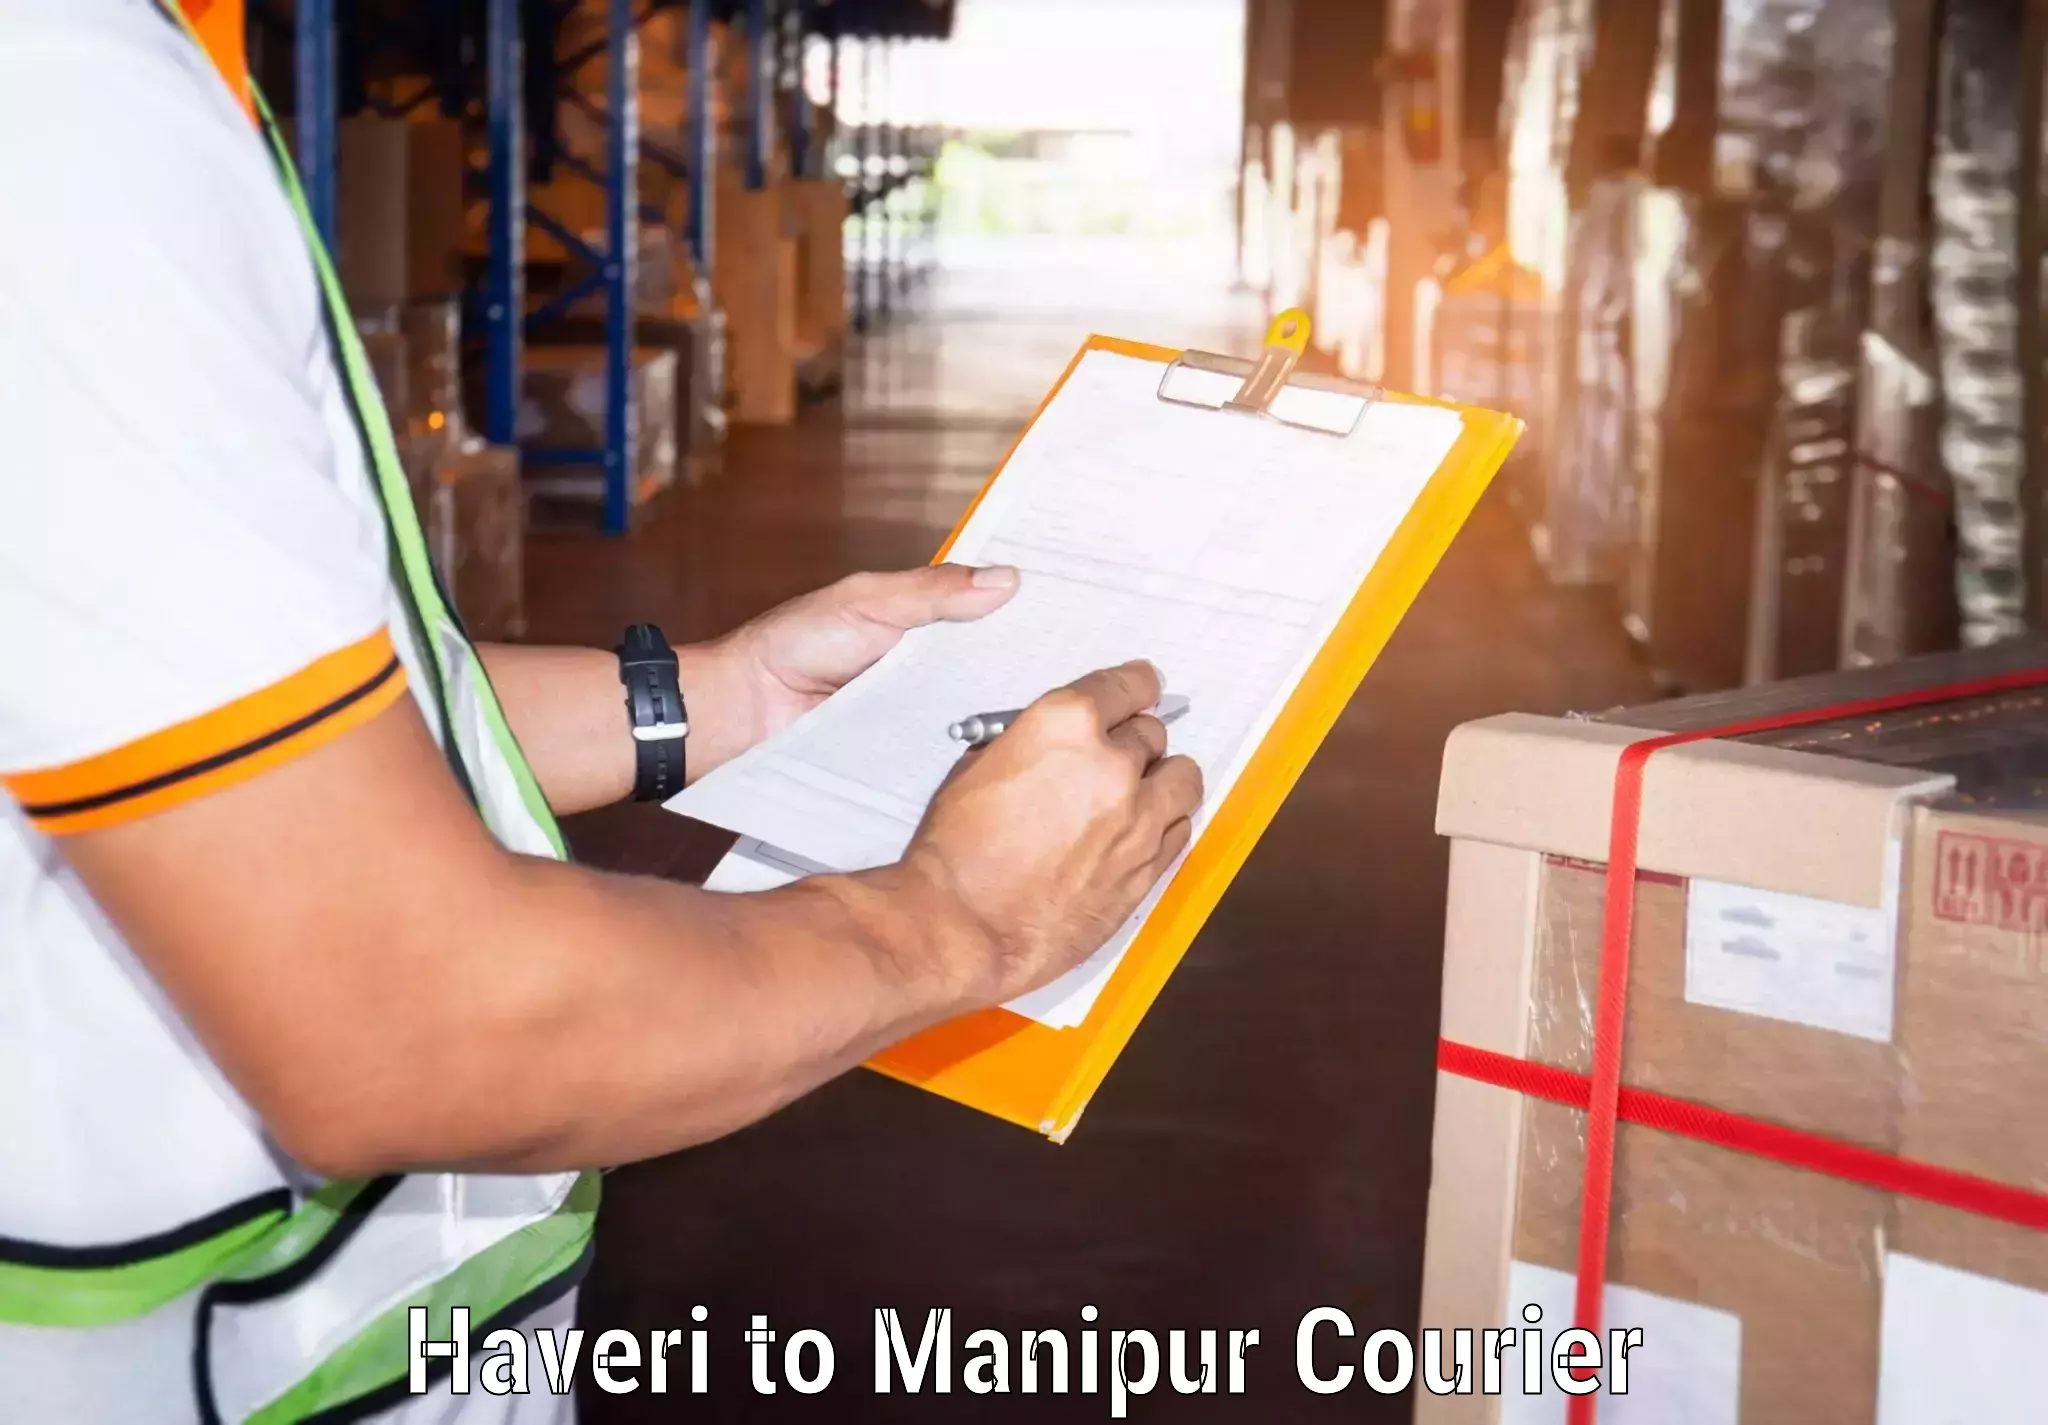 Package delivery network Haveri to Manipur